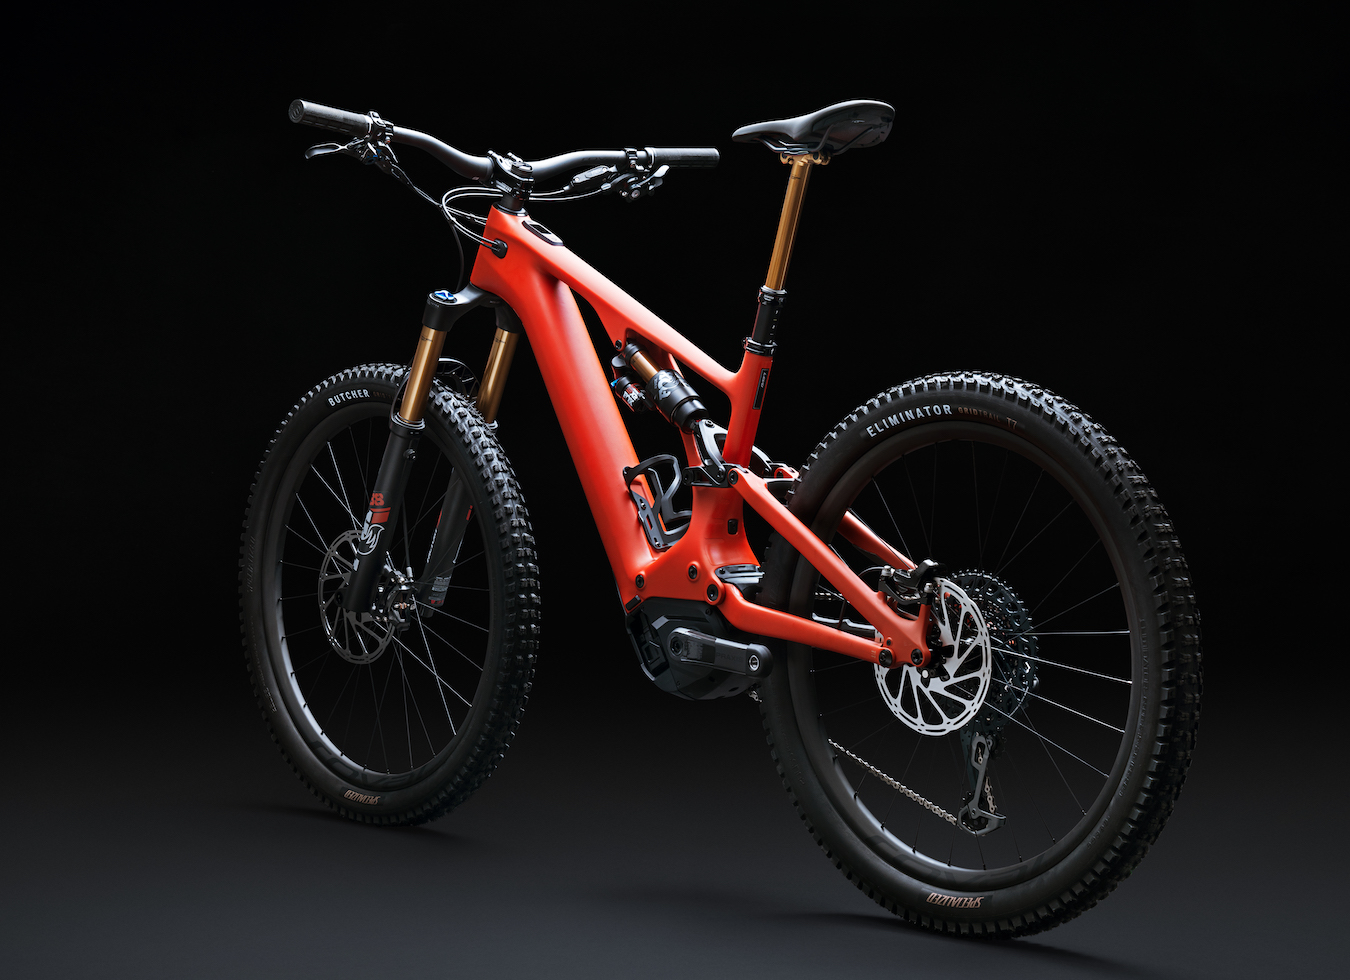 New Specialized LEVO electric mountain bike has prime design (and price)